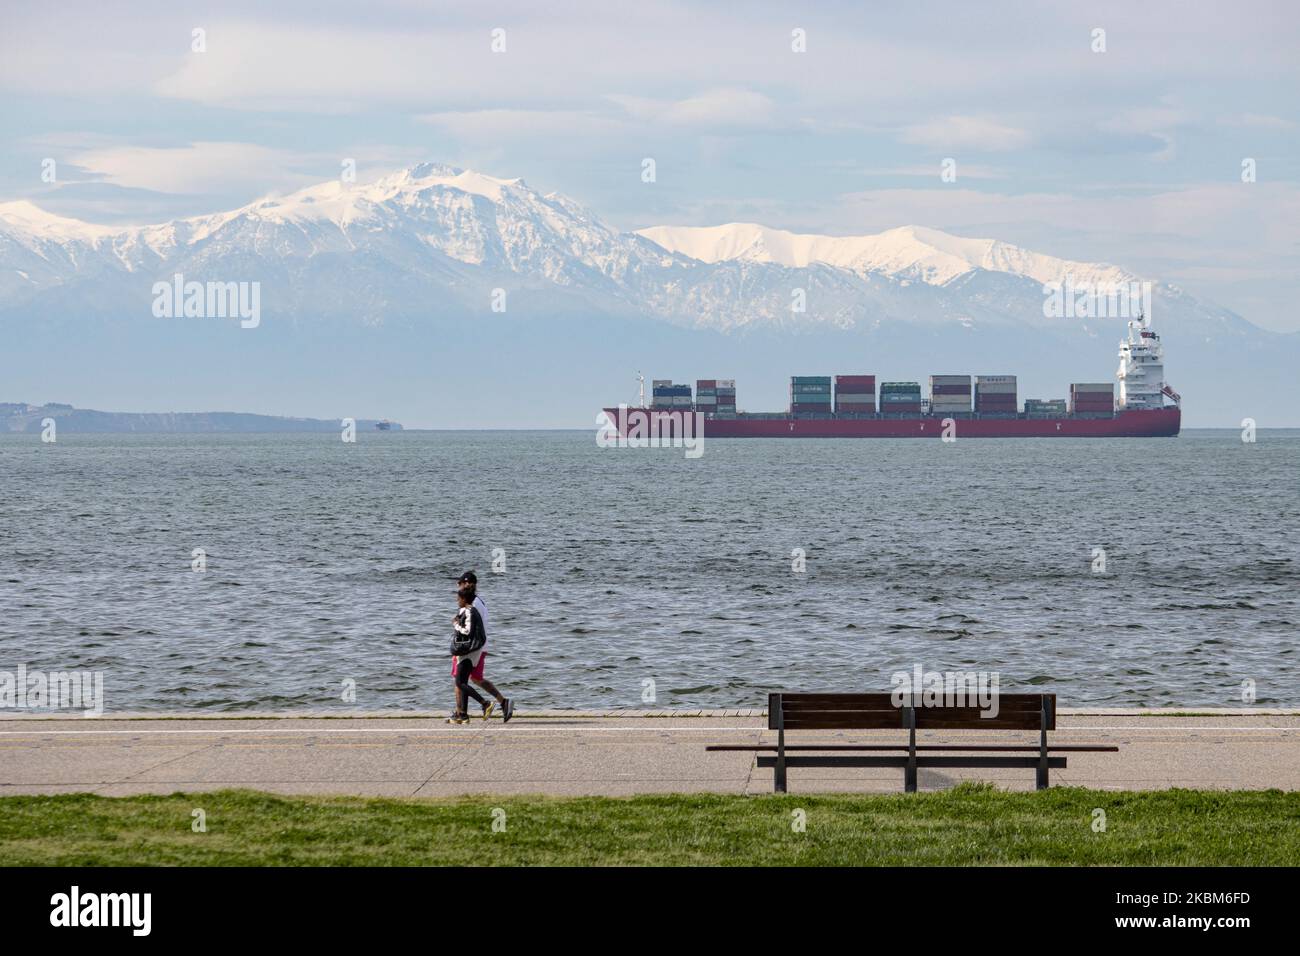 A freight vessel as seen from the seafront of Thessaloniki city anchored at Thermaikos Gulf, Aegean Sea in Greece on April 7, 2020. The cargo ship carries containers shipment and is under the name Ef Emira, with IMO registration number 9357810, sailing under the flag of Marshall Islands. The ship waits to unload its merchandise at the Port of Thessaloniki, the second-largest container port in Greece but there is a delay in the port due to Covid-19 Coronavirus Pandemic. Snow covered Mount Olympus is visible in the background. (Photo by Nicolas Economou/NurPhoto) Stock Photo